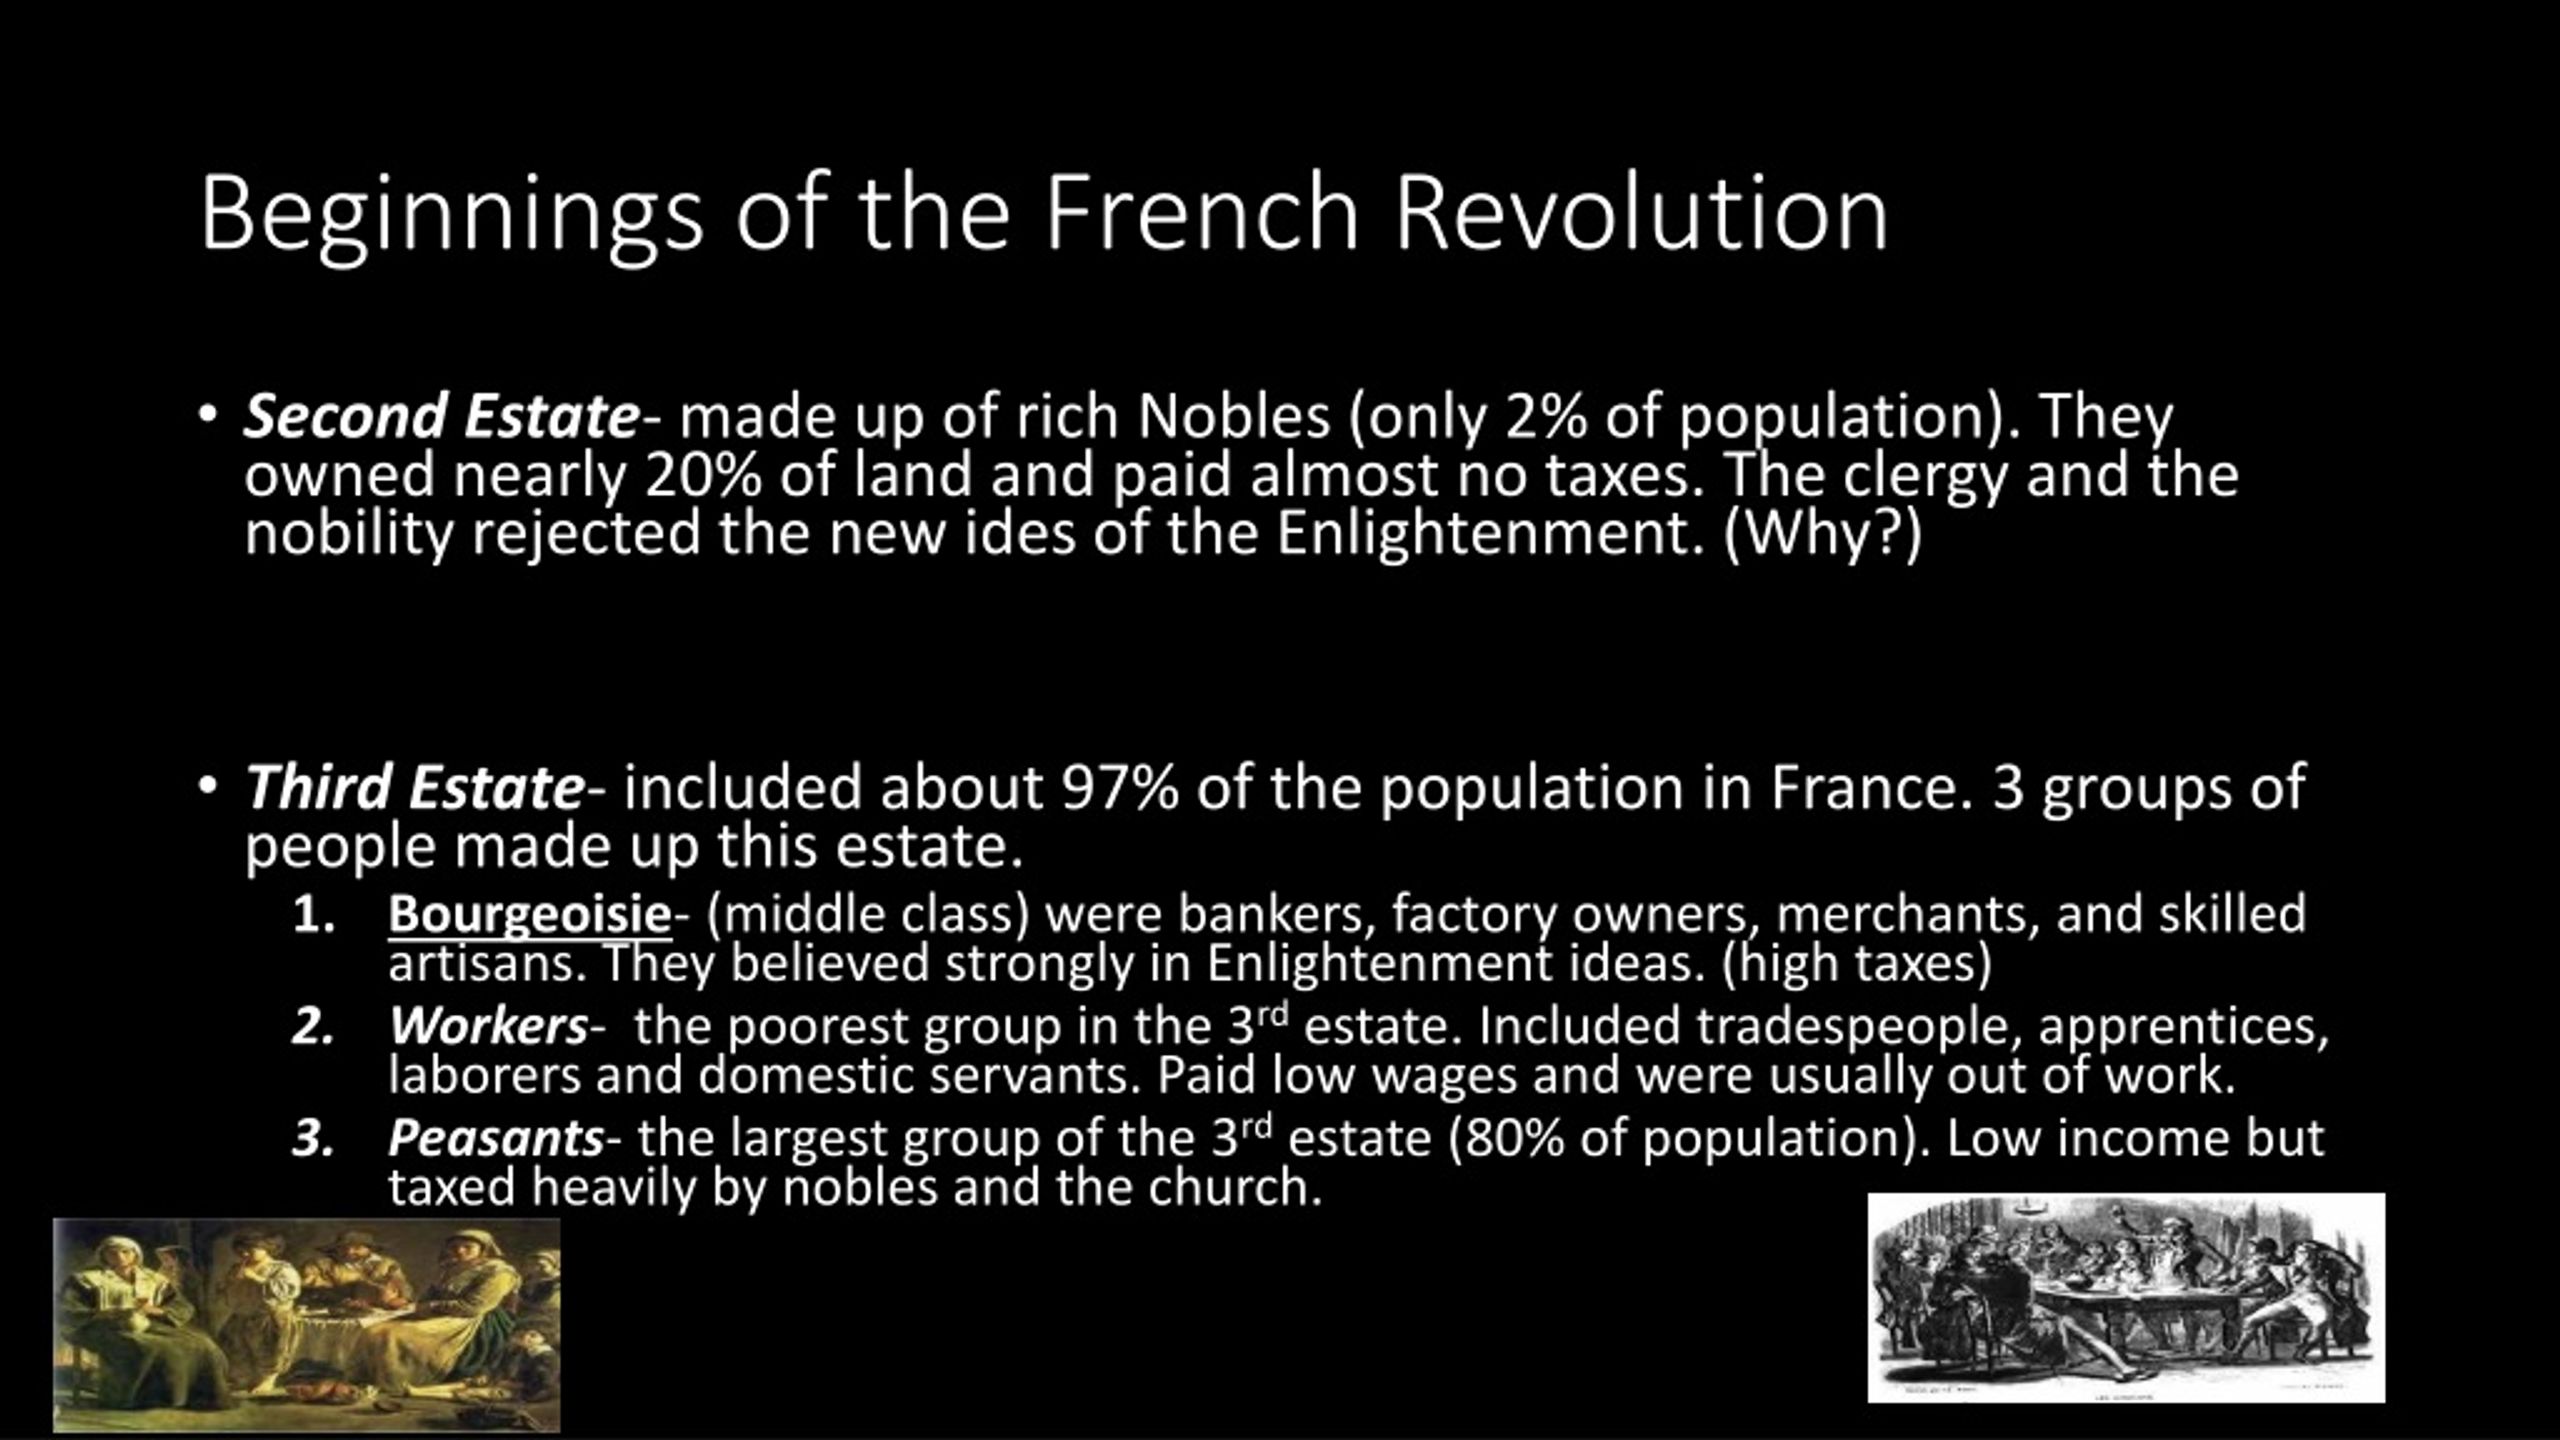 PPT Ch. 7 The French Revolution and Napoleon PowerPoint